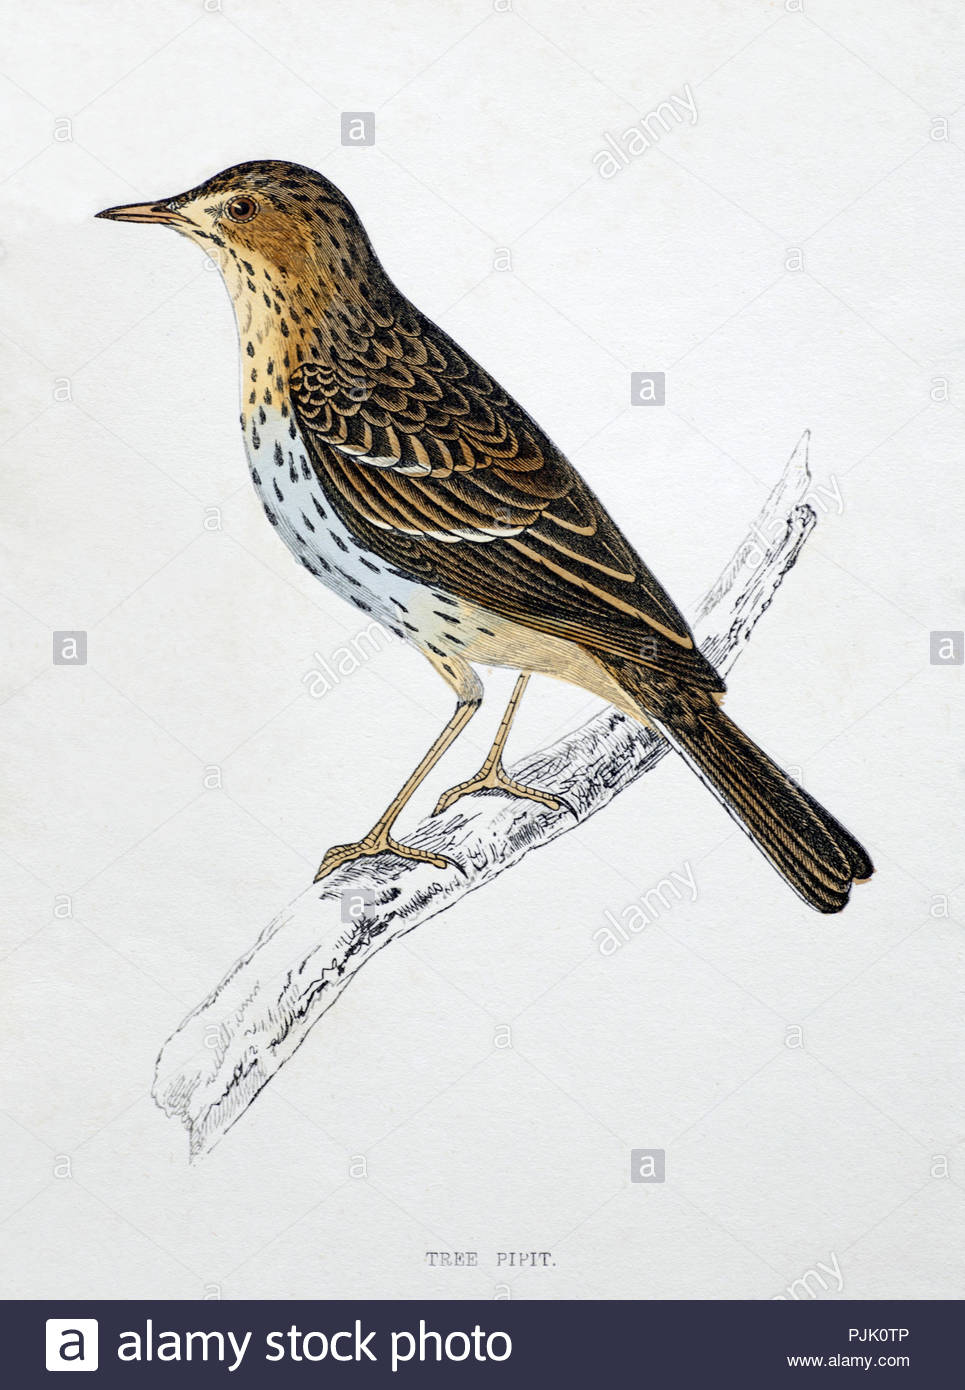 Tree Pipit (Anthus trivialis) vintage illustration, from A History of British Birds by Rev. Francis Orpen Morris, published in c1850 Stock Photo